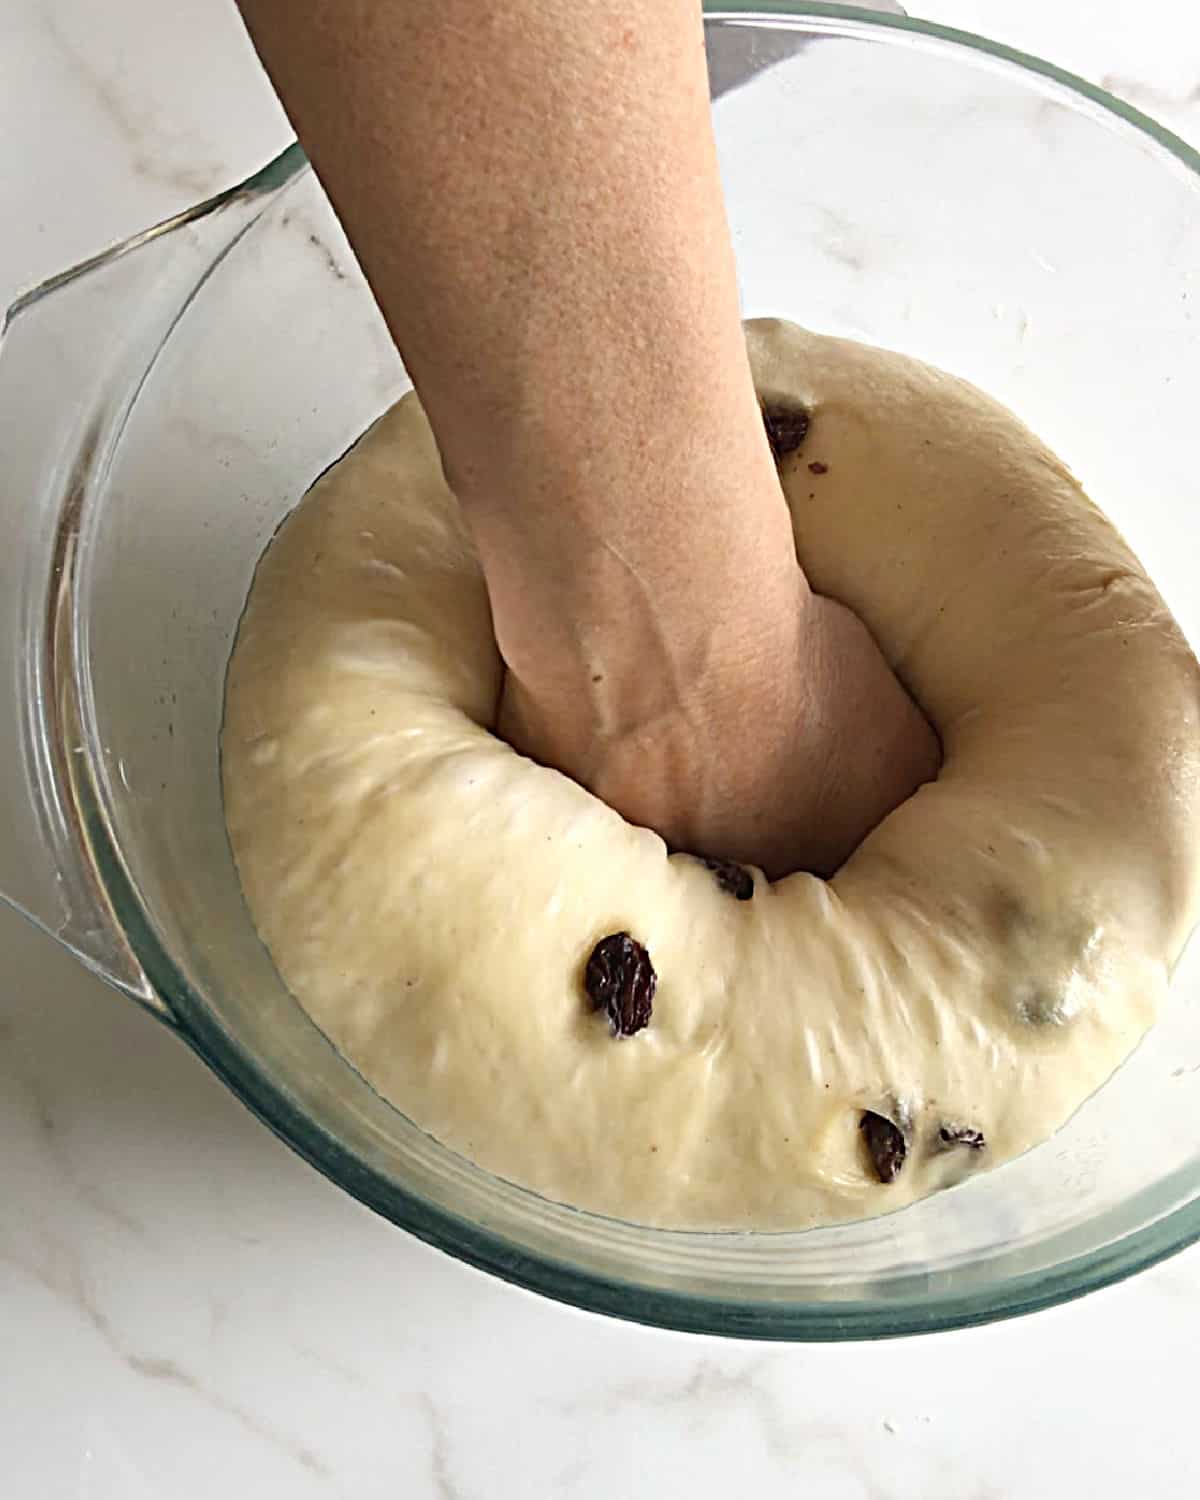 Punching down a risen raisin dough in a glass bowl on a white marble surface.